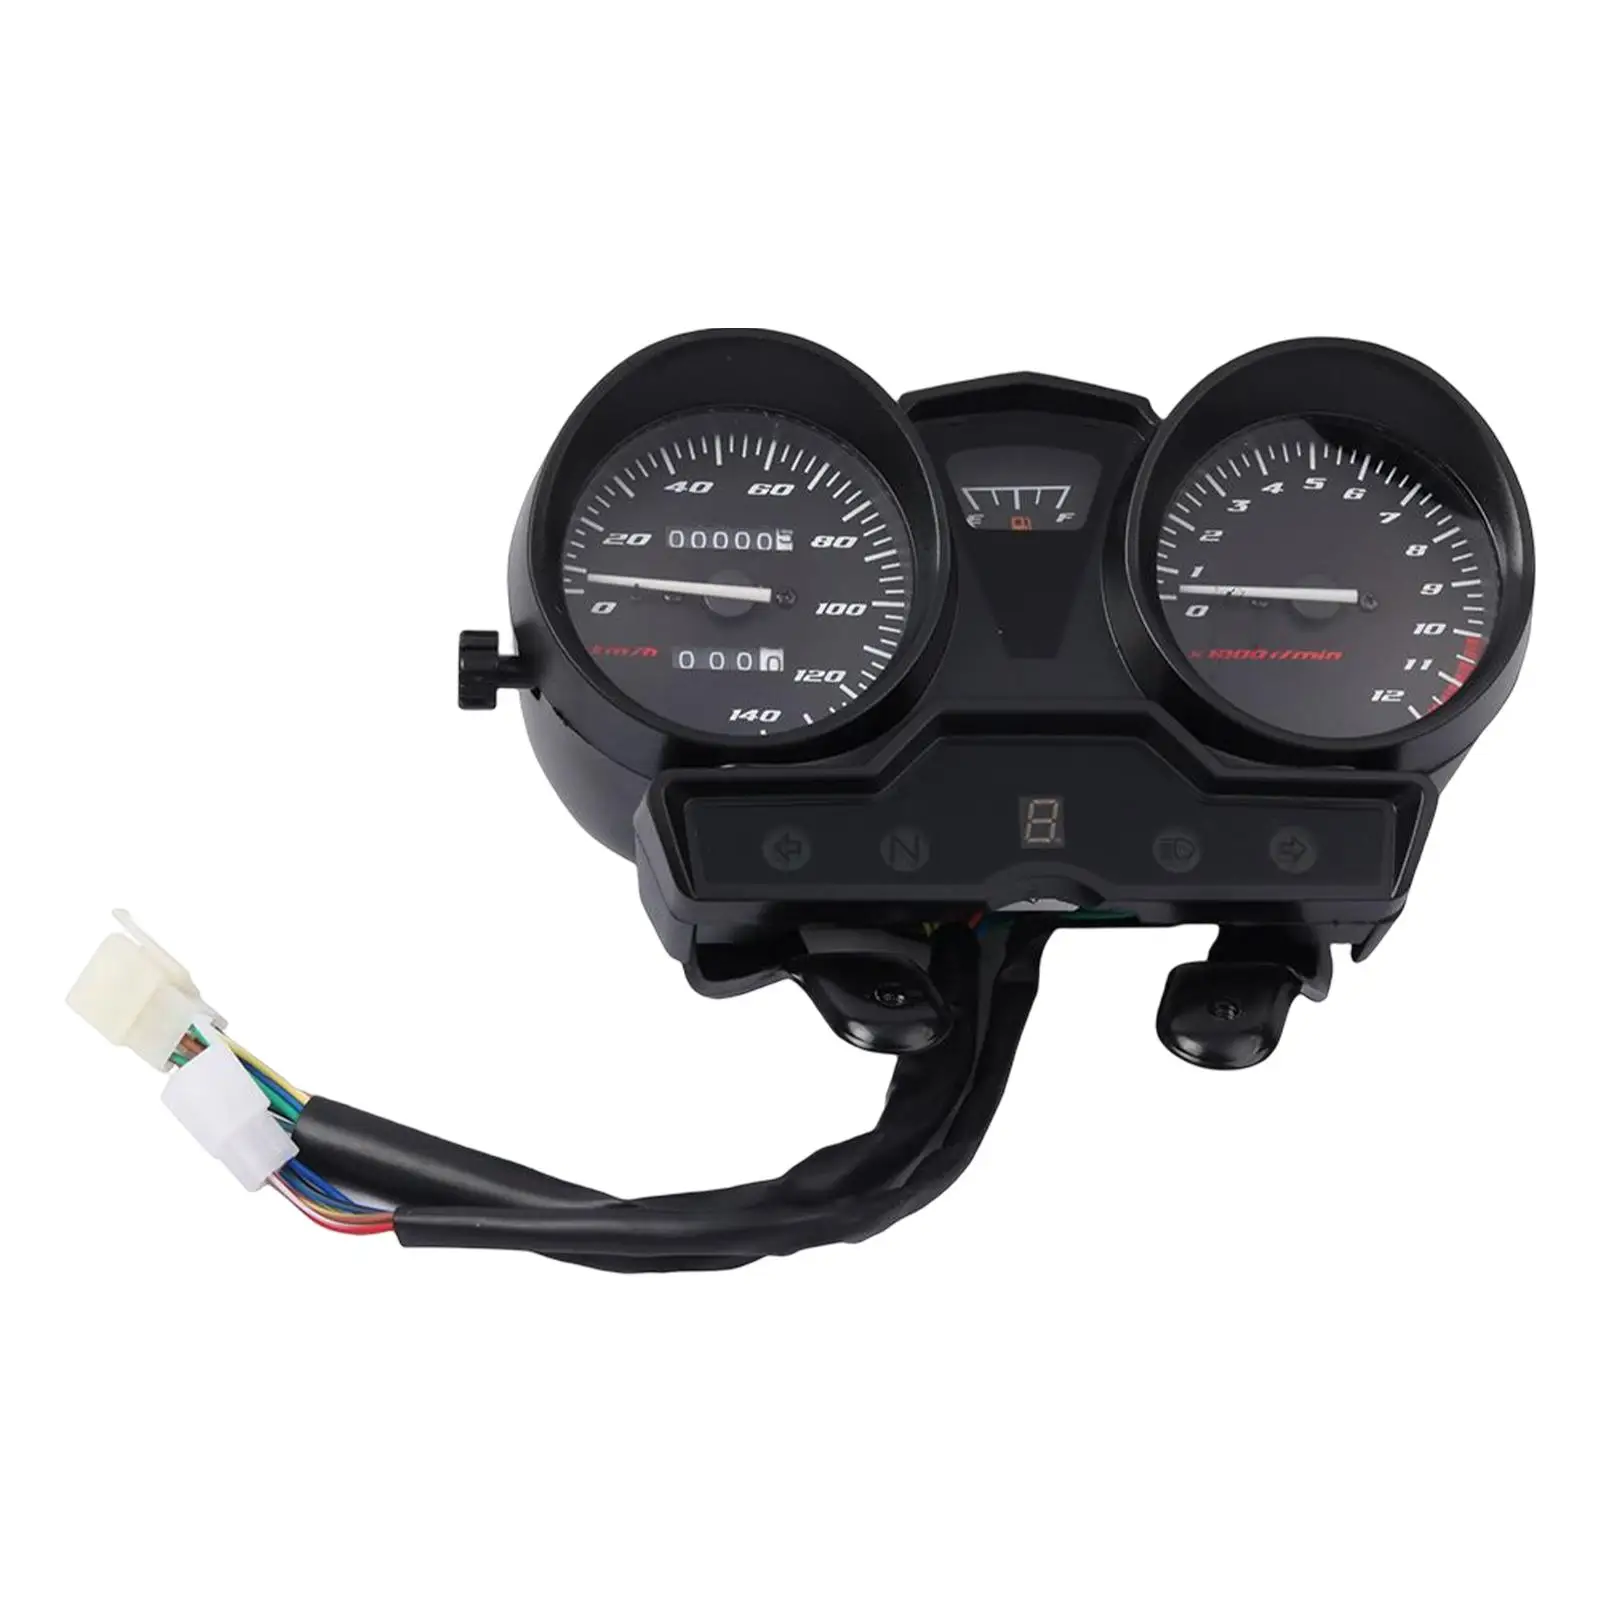 LED Digital Dashboard Motorcycle RPM Meter with Gear Display Car Accessories Premium